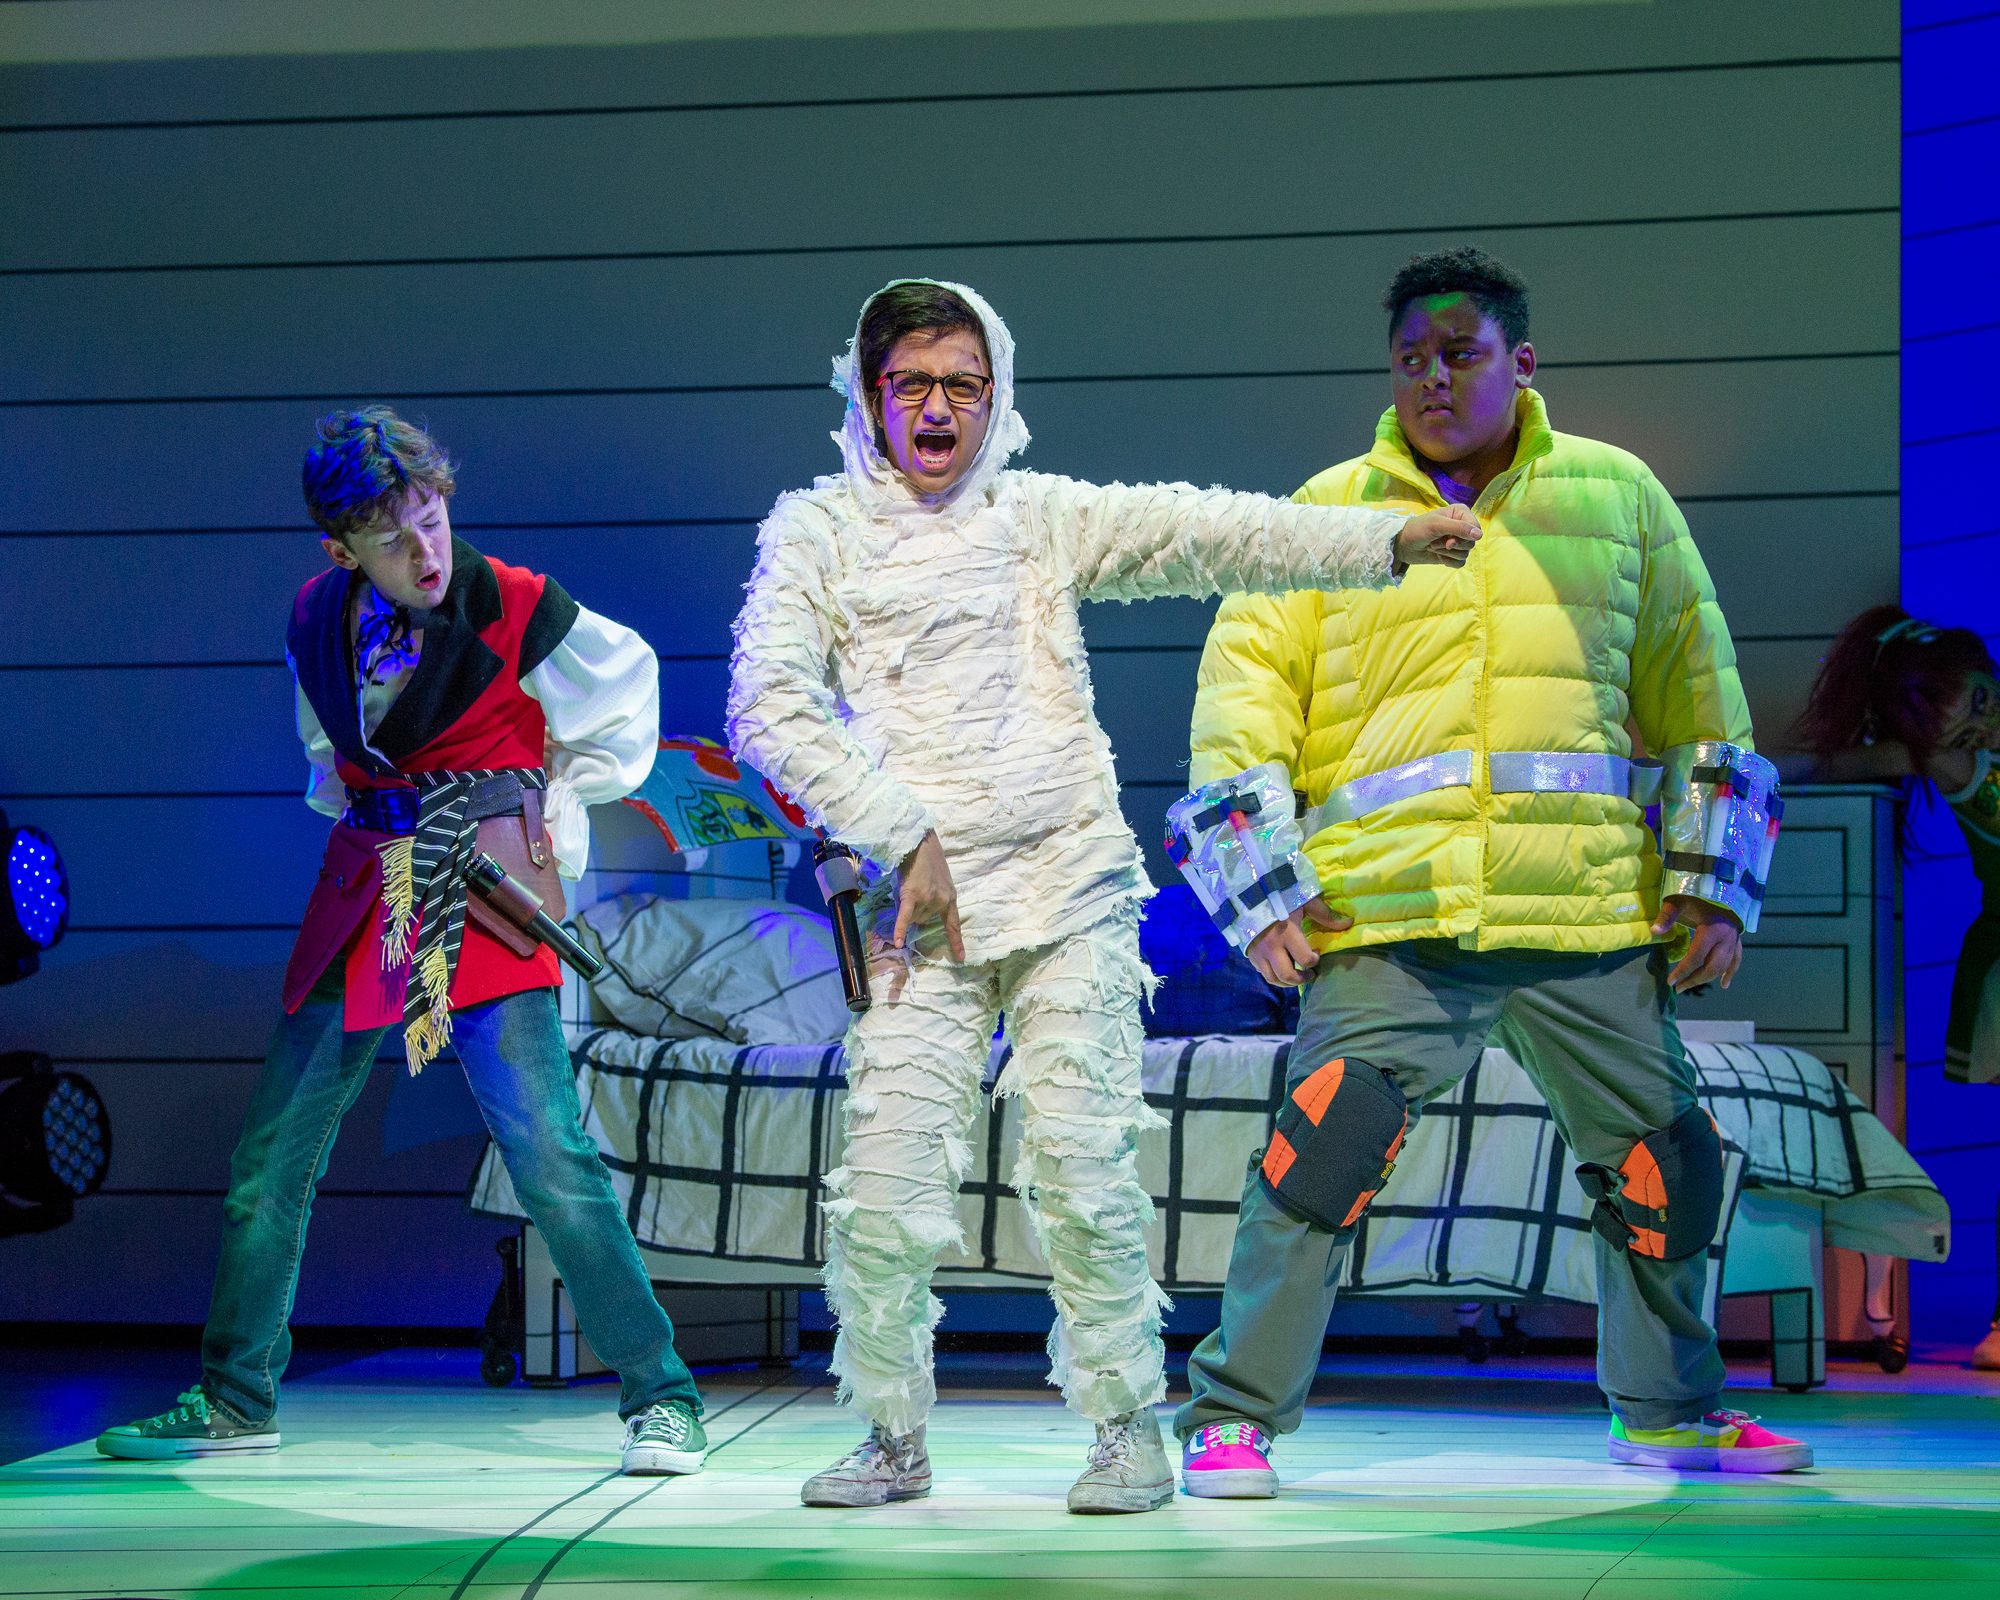 Broadway Licensing Adds Diary of a Wimpy Kid: The Musical to